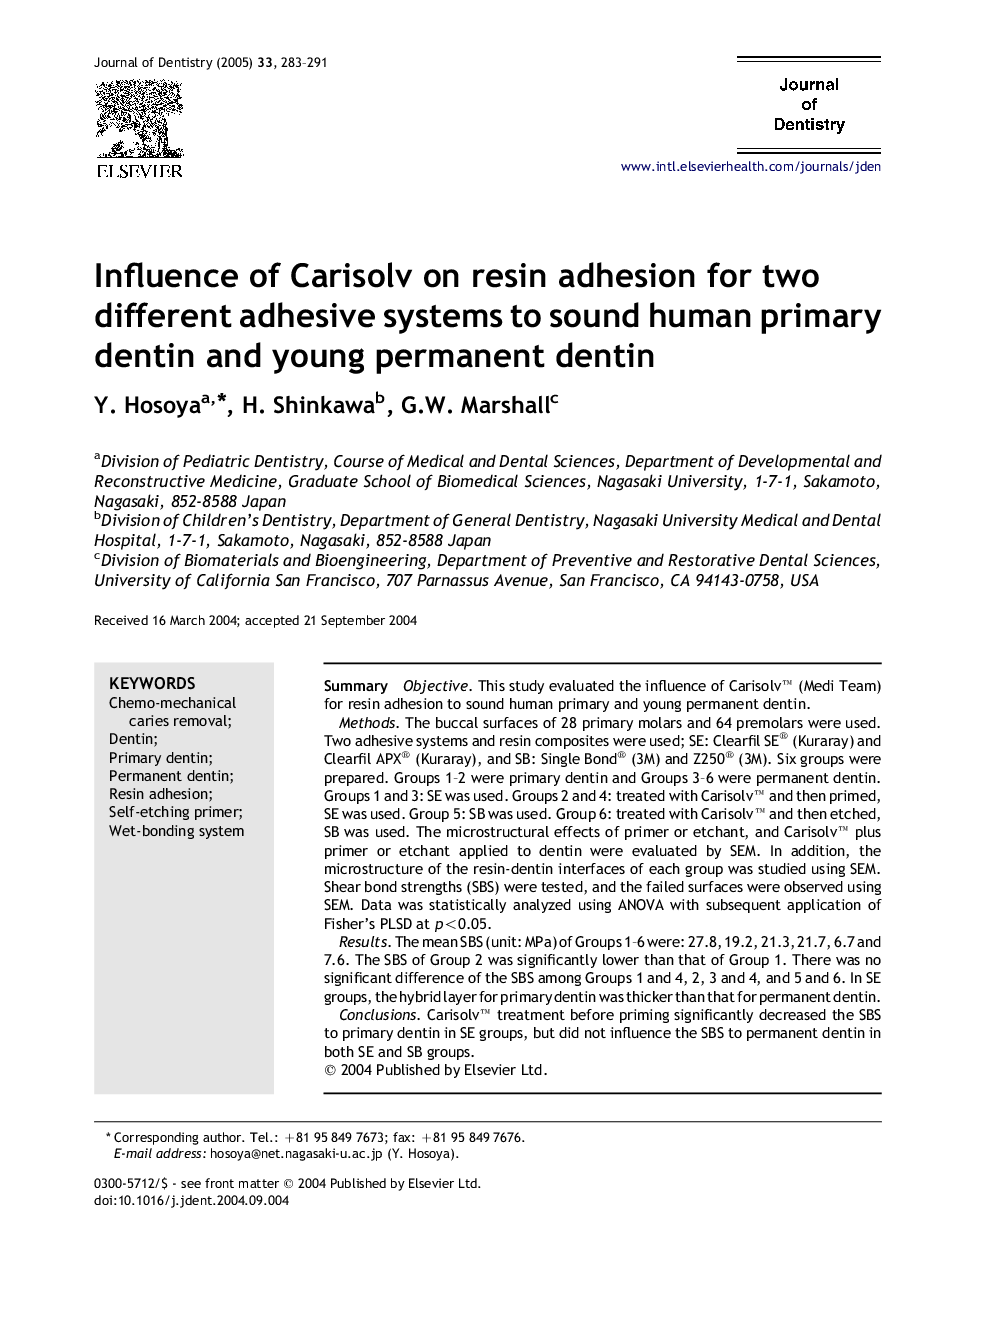 Influence of Carisolv on resin adhesion for two different adhesive systems to sound human primary dentin and young permanent dentin